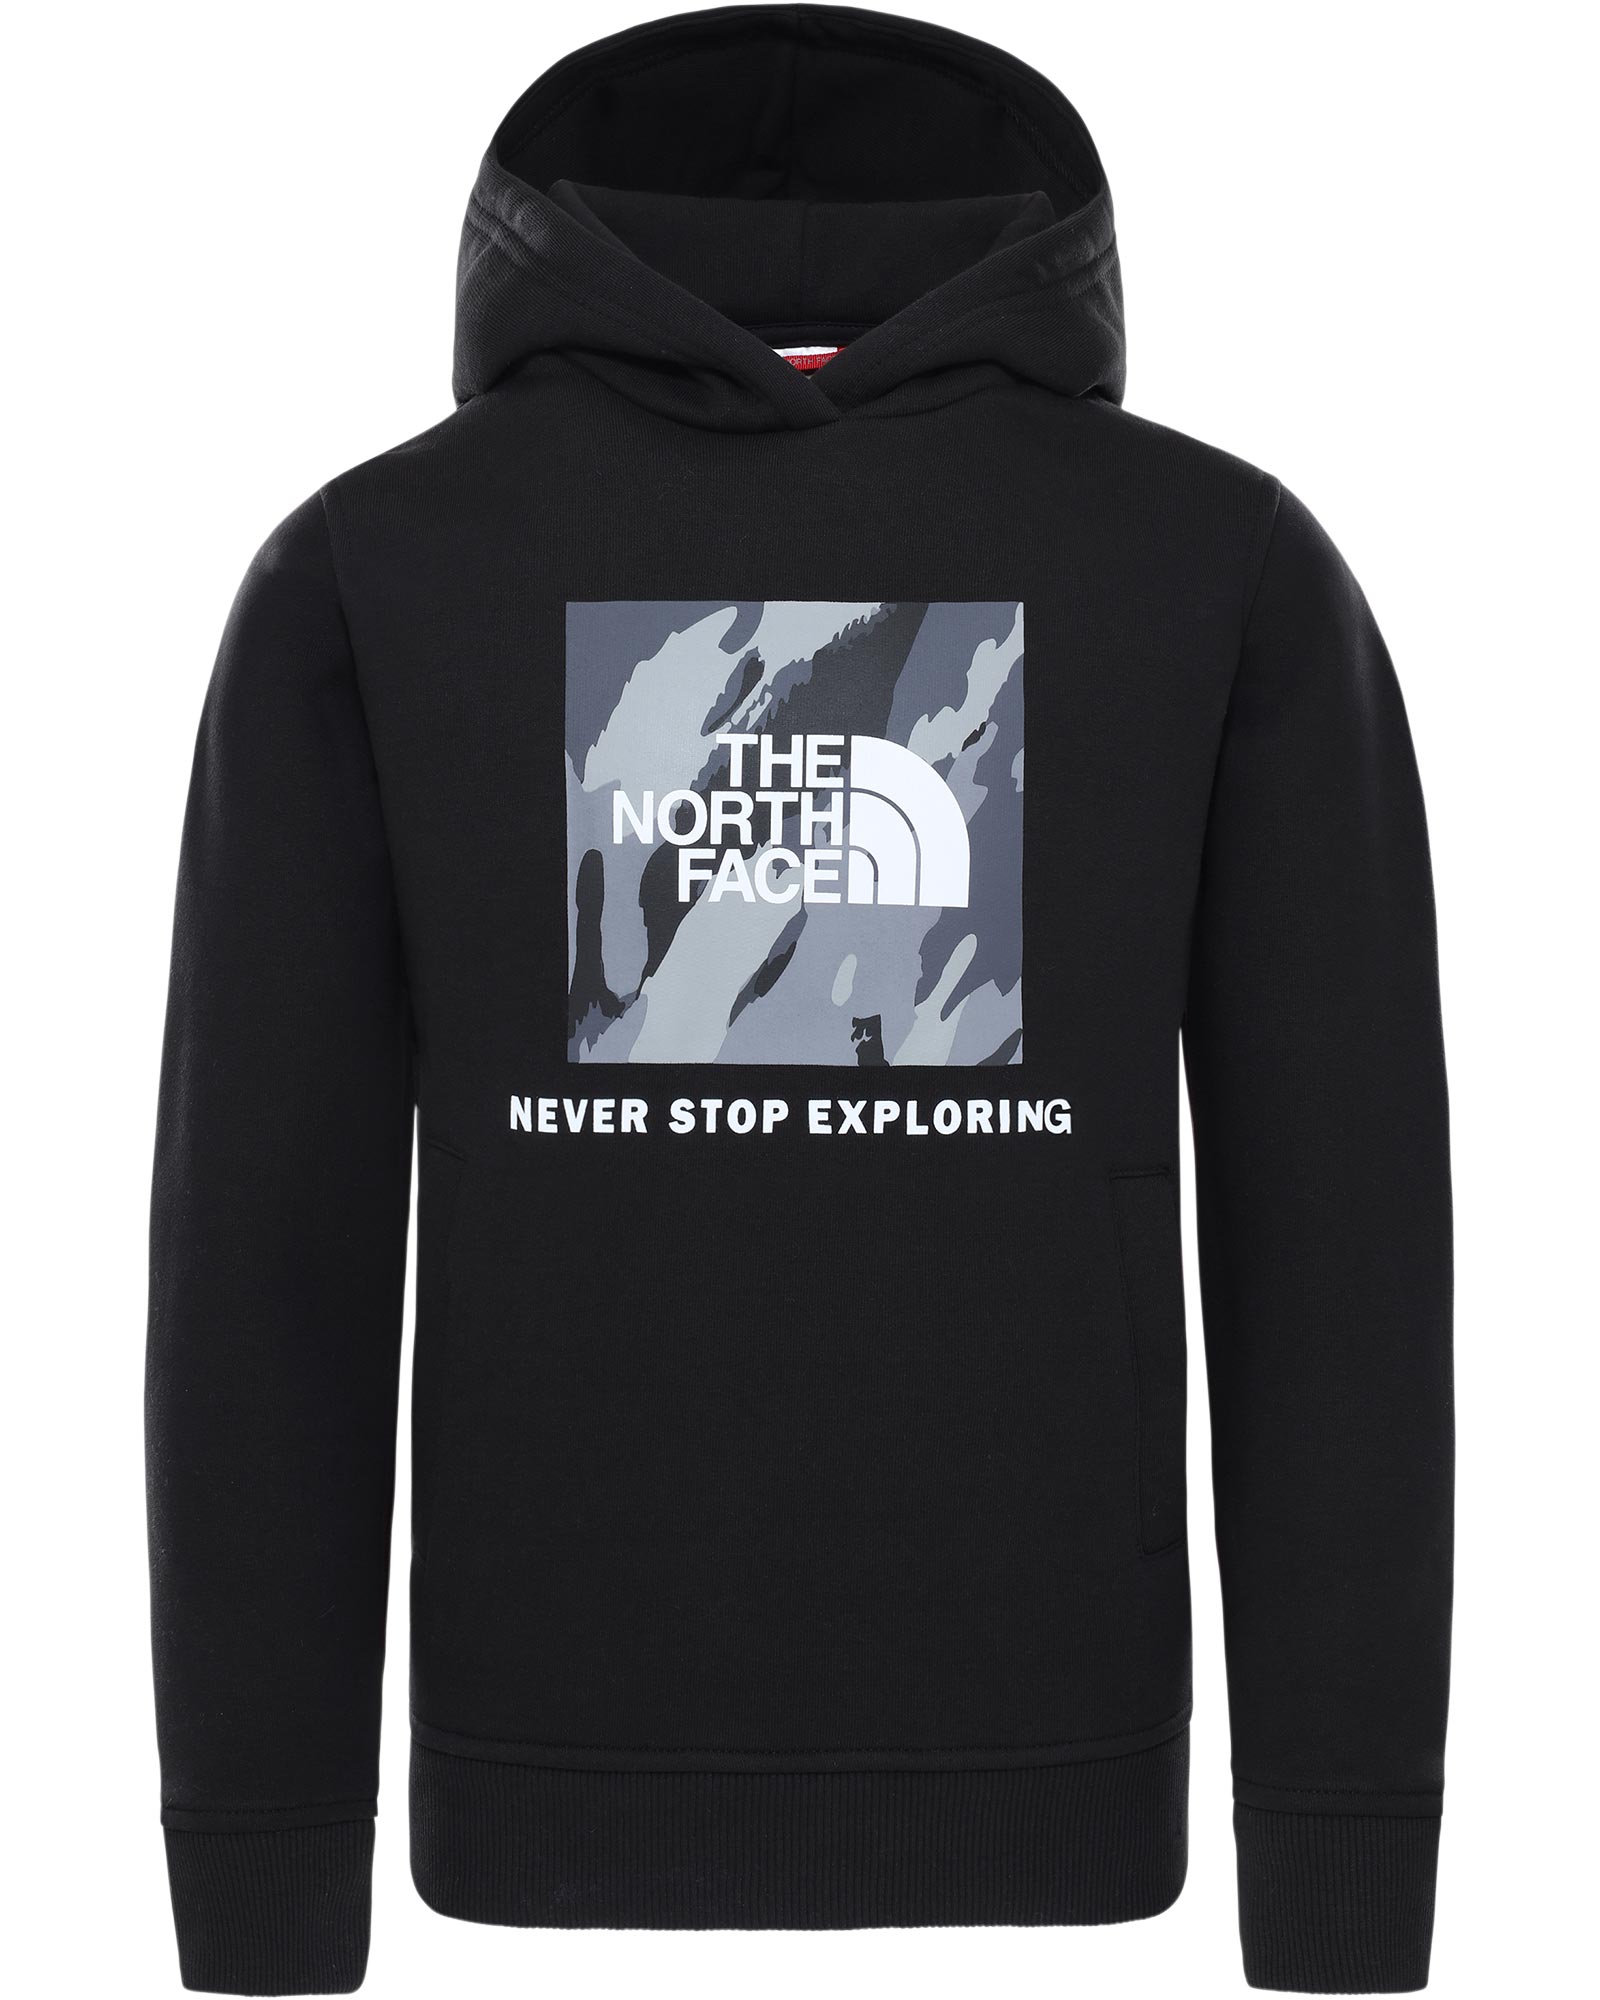 The North Face Box Kids Pullover Hoodie